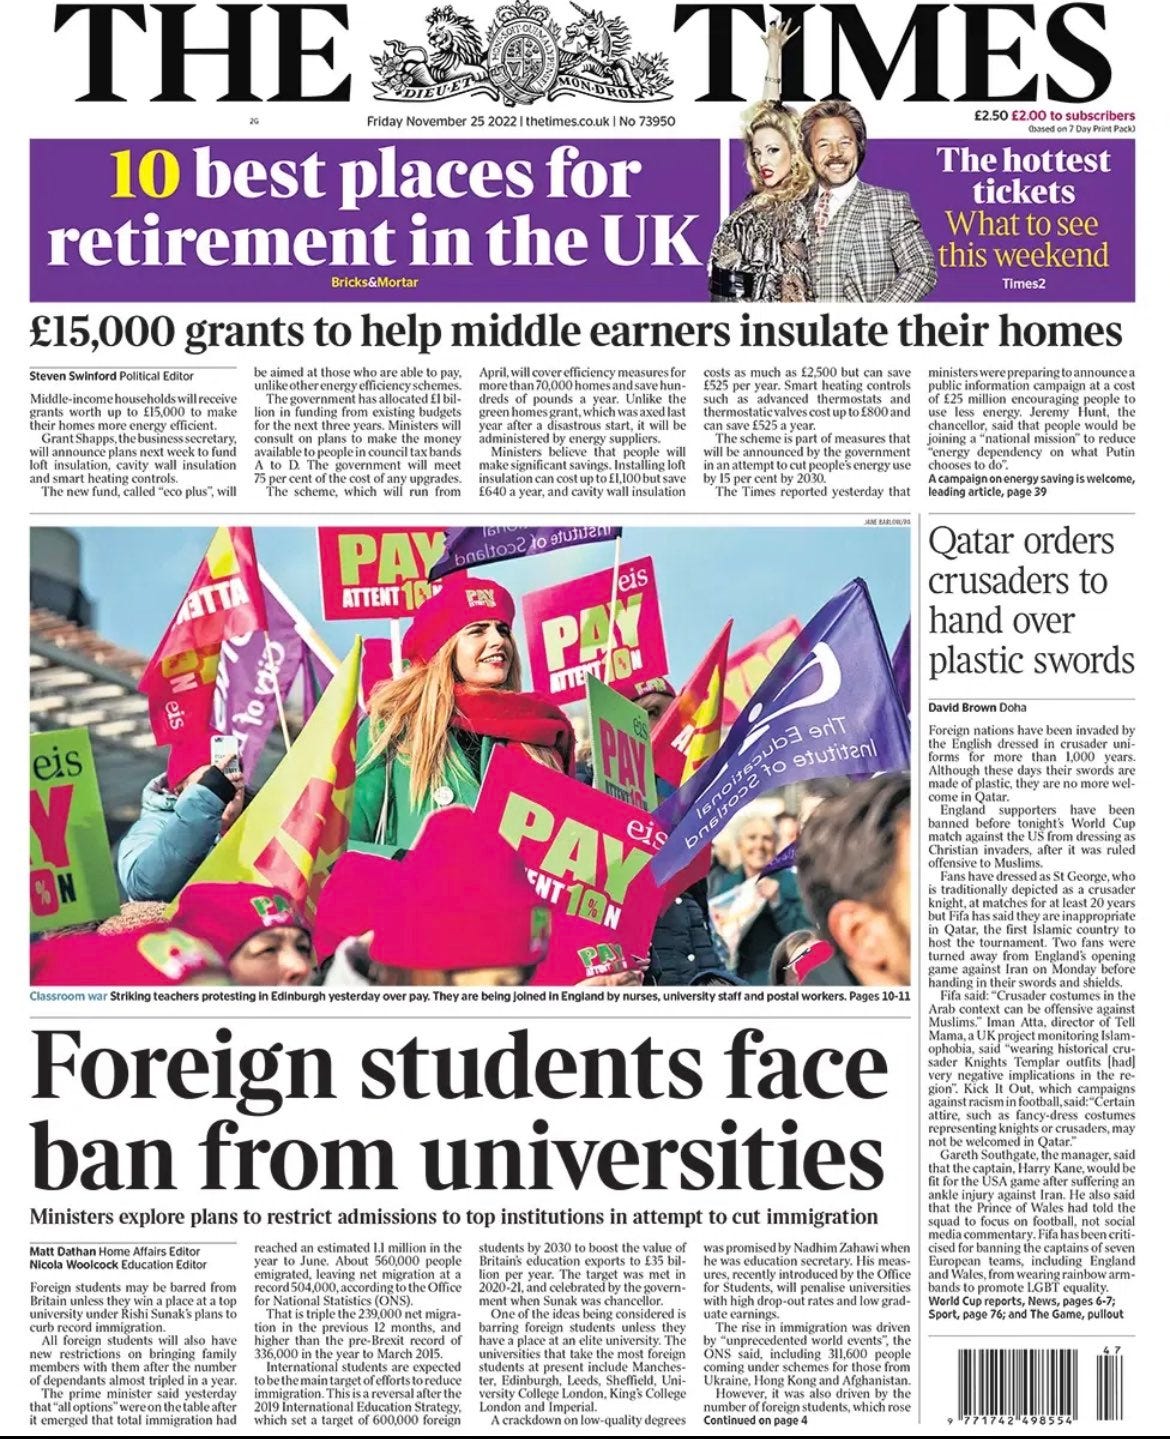 The front page of the Times of London, Friday November 25, 2022. The lead headline reads "Foreign Students Face Ban From Universities" and is accompanied by a picture of striking teachers waving pink and purple banners in Edinburgh.